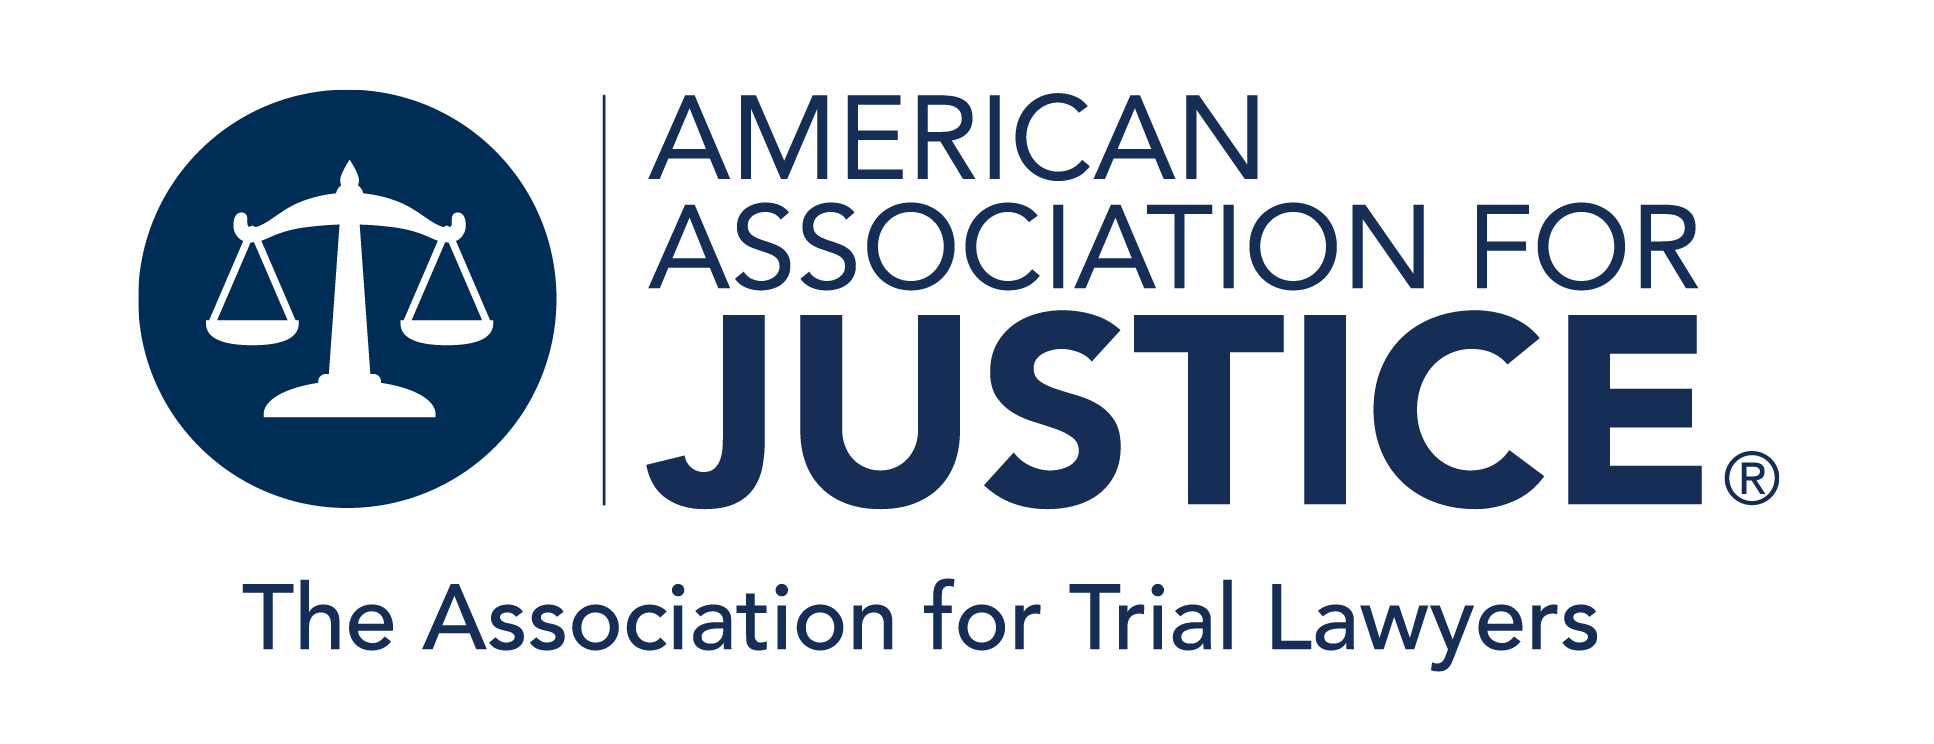 American Association for Justice - logo